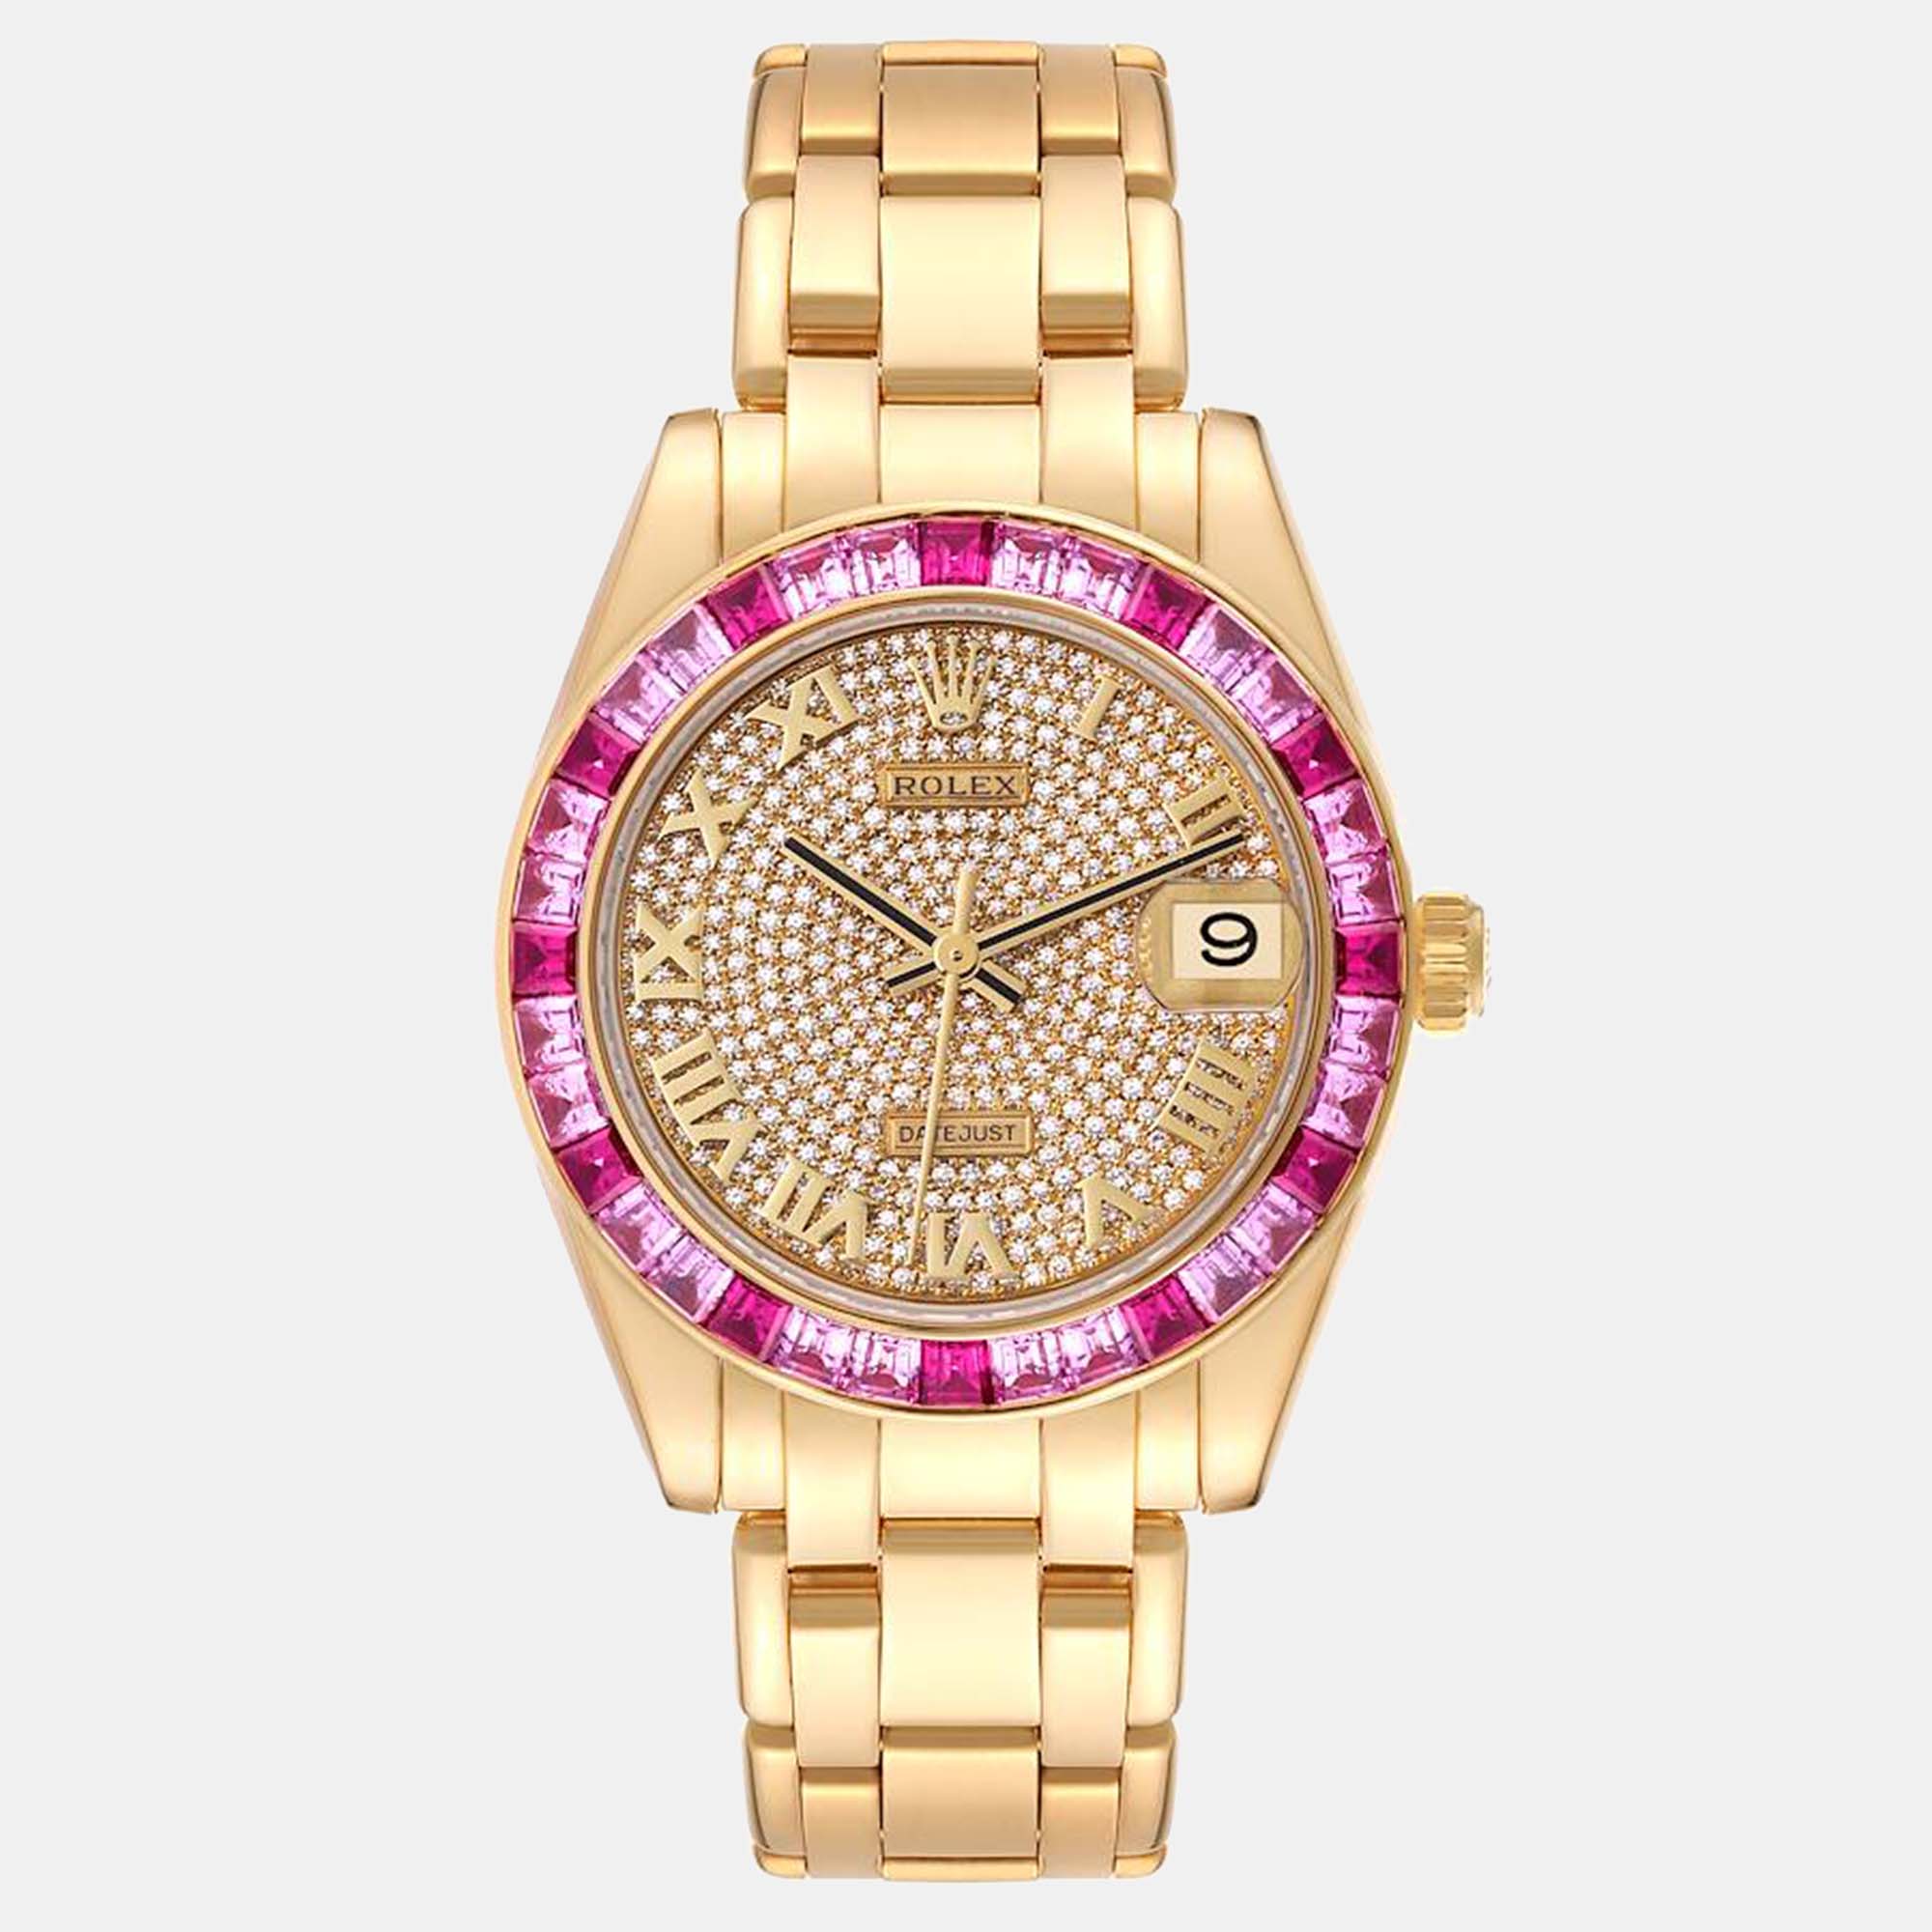 Rolex pearlmaster yellow gold pave dial sapphire bezel ladies watch 81348 34 mm